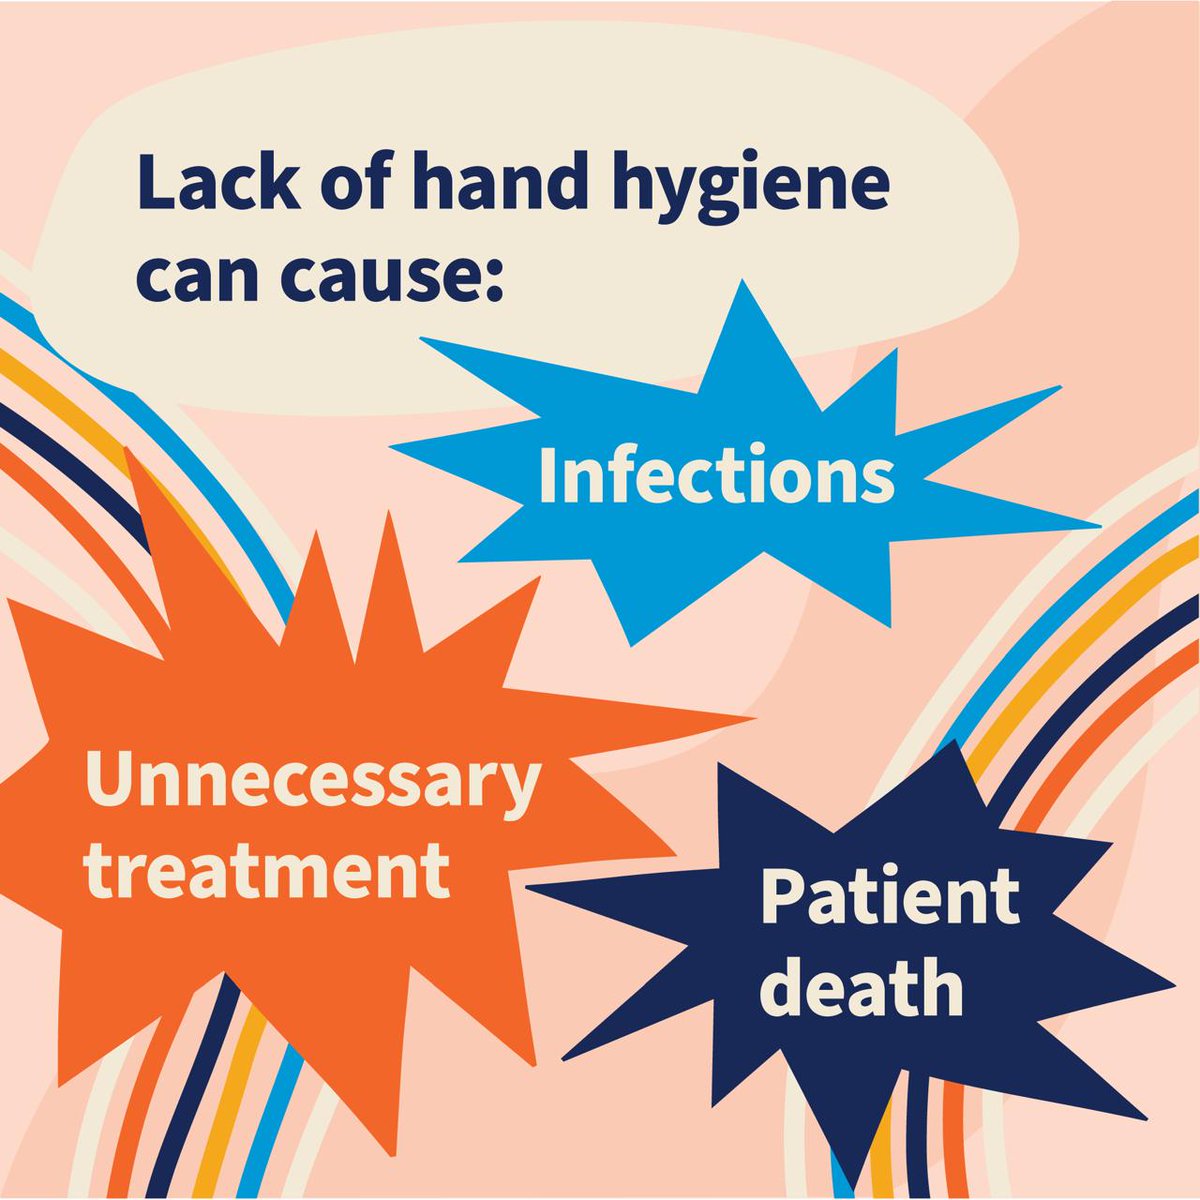 Join us in observing World Hand Hygiene Day on 5th May 2024! Remember, lack of hand hygiene can lead to infections, unnecessary treatment, & patient death. Let's prioritize hand hygiene for a safer healthcare environment. #WorldHandHygieneDay #CleanHandsSaveLives #LankaHospitals